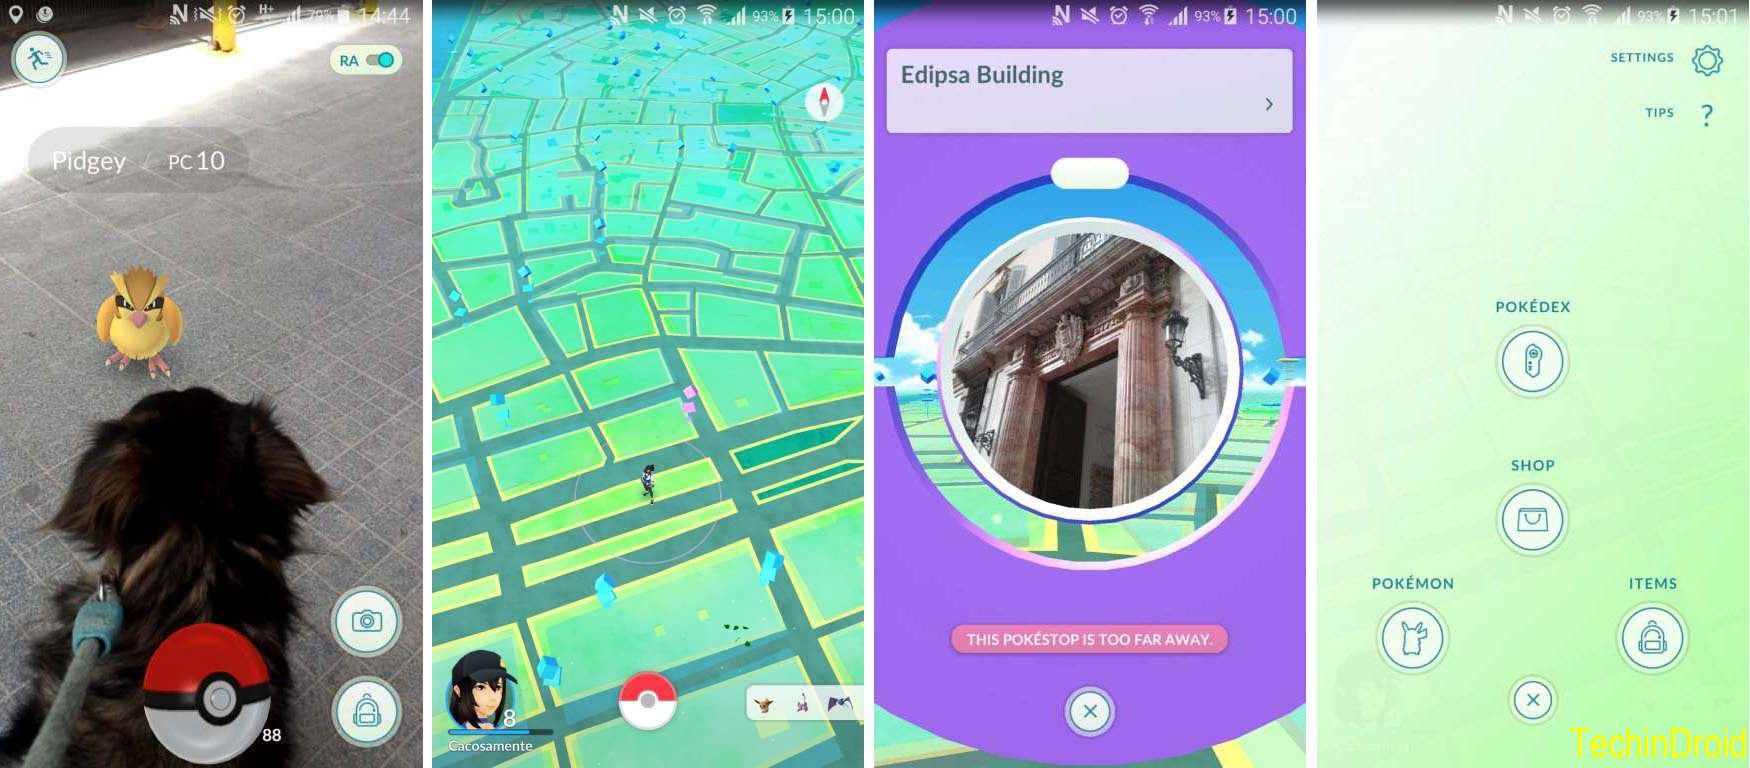 Pokemon Go Apk Download v0.239.2 (Latest) - Free for Android